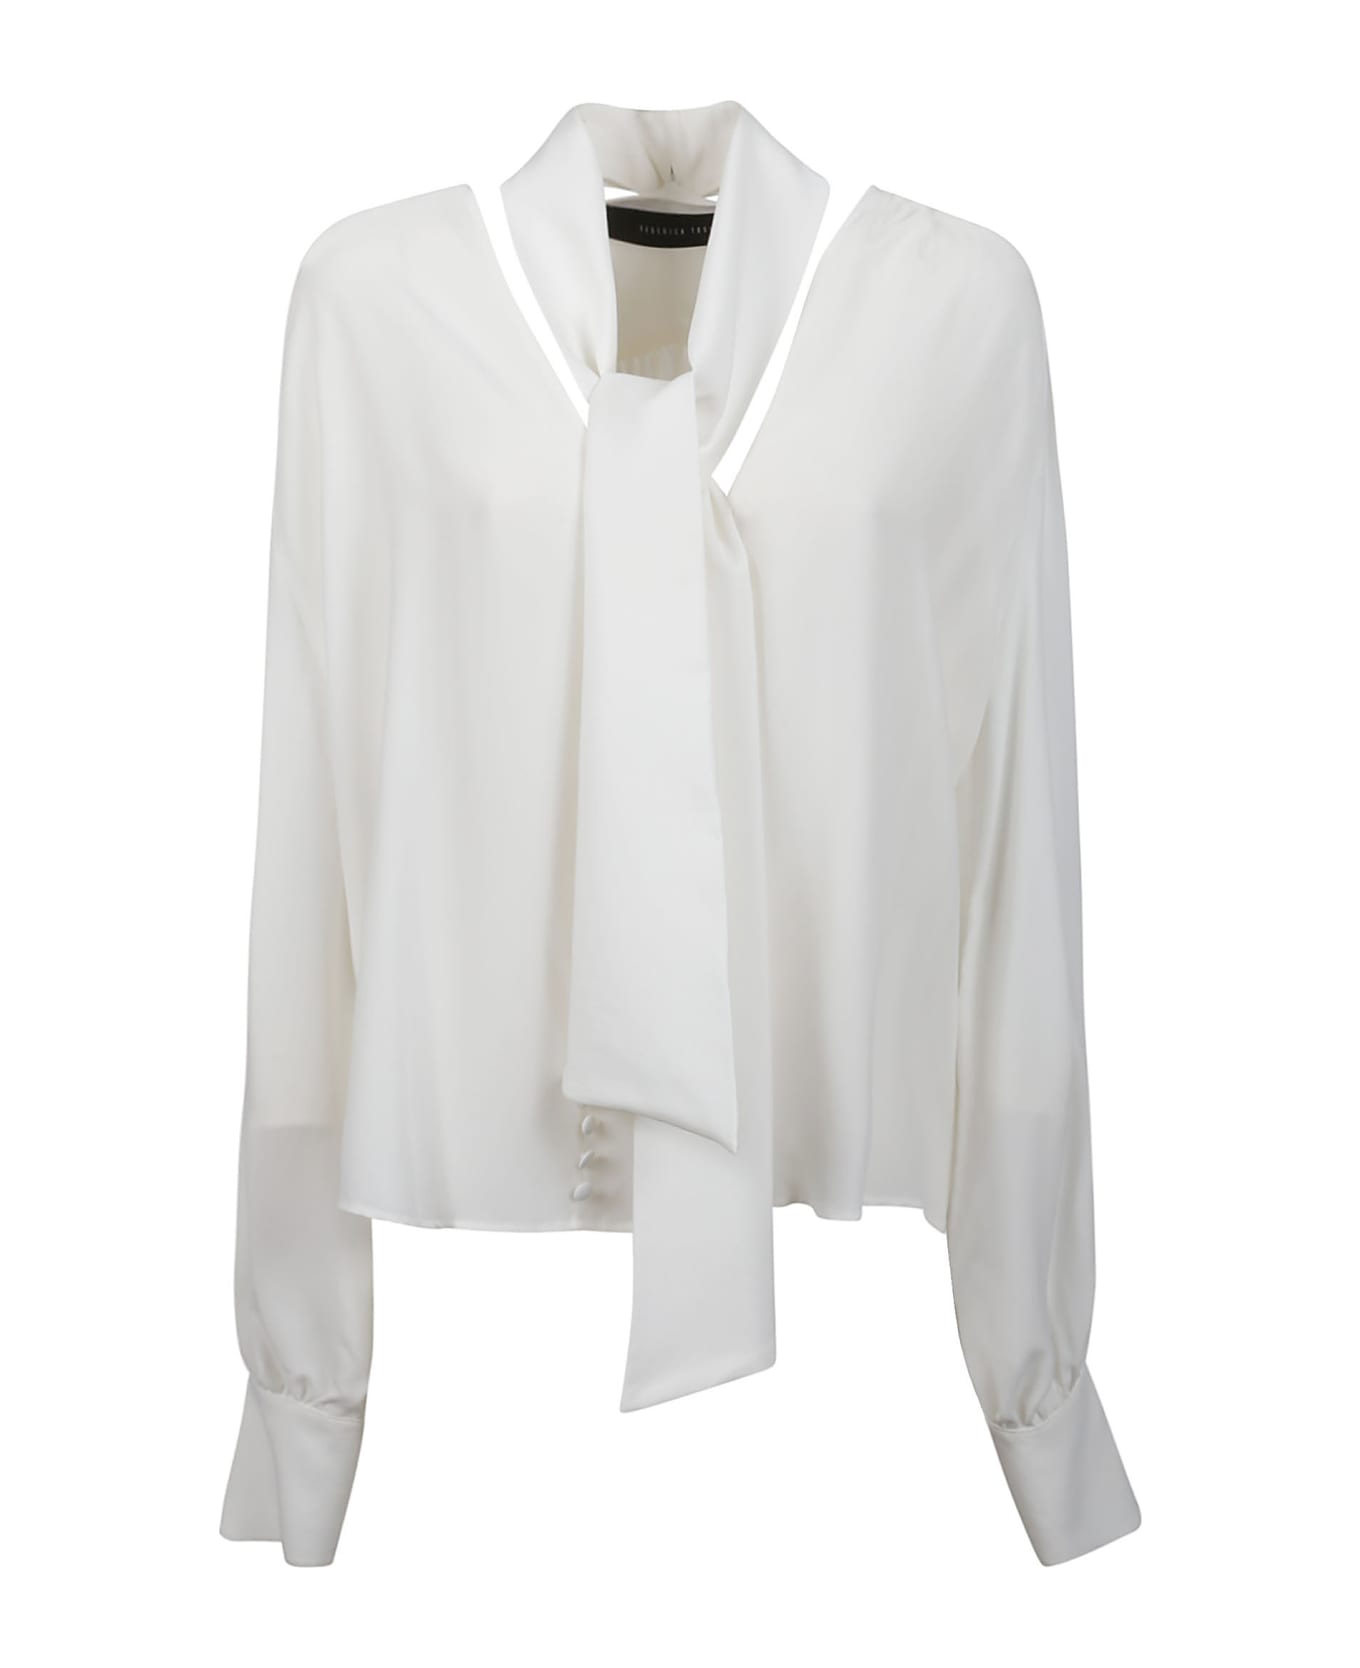 Federica Tosi Pussy-bow Pleated Blouse - Bianco ブラウス